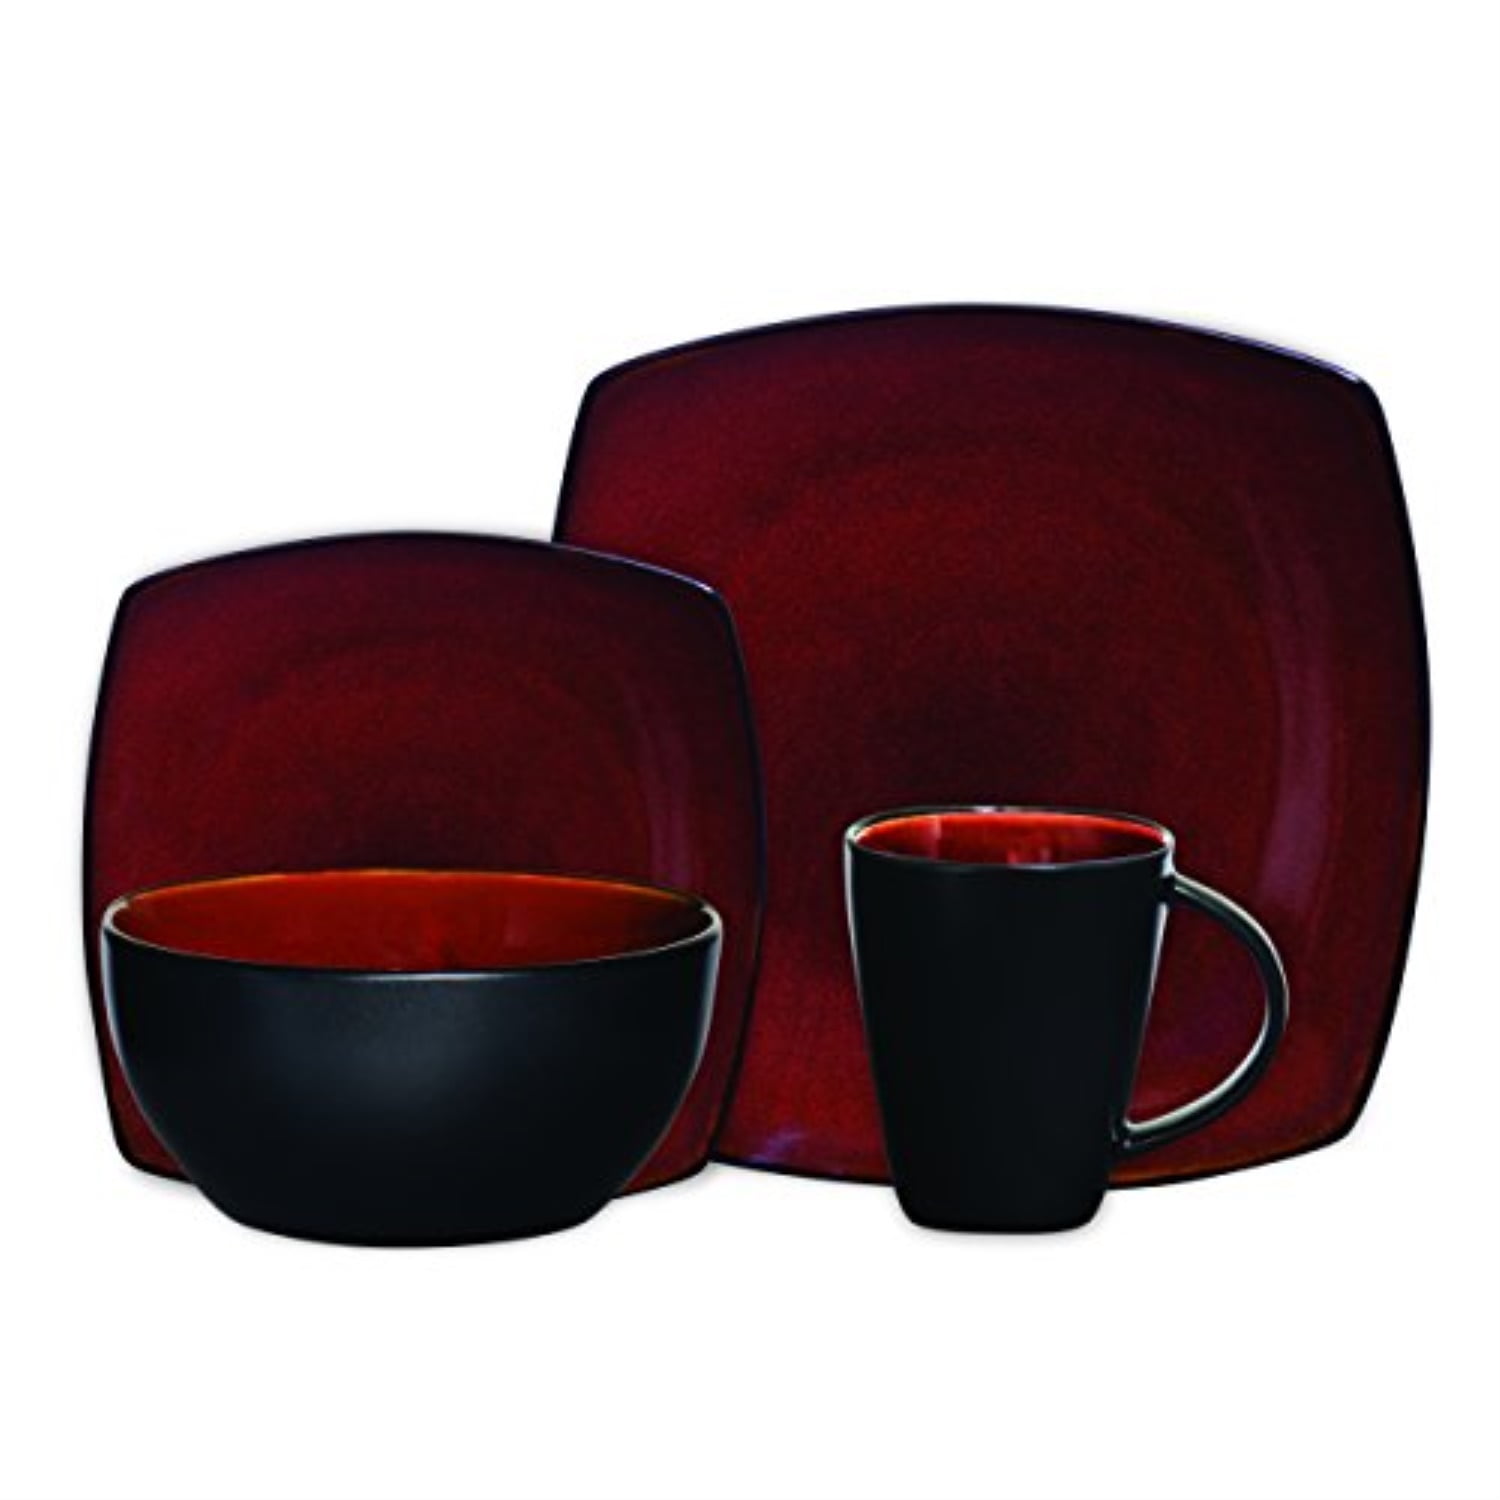 Gibson Home Soho Lounge Square 16-Piece red Dinnerware Set